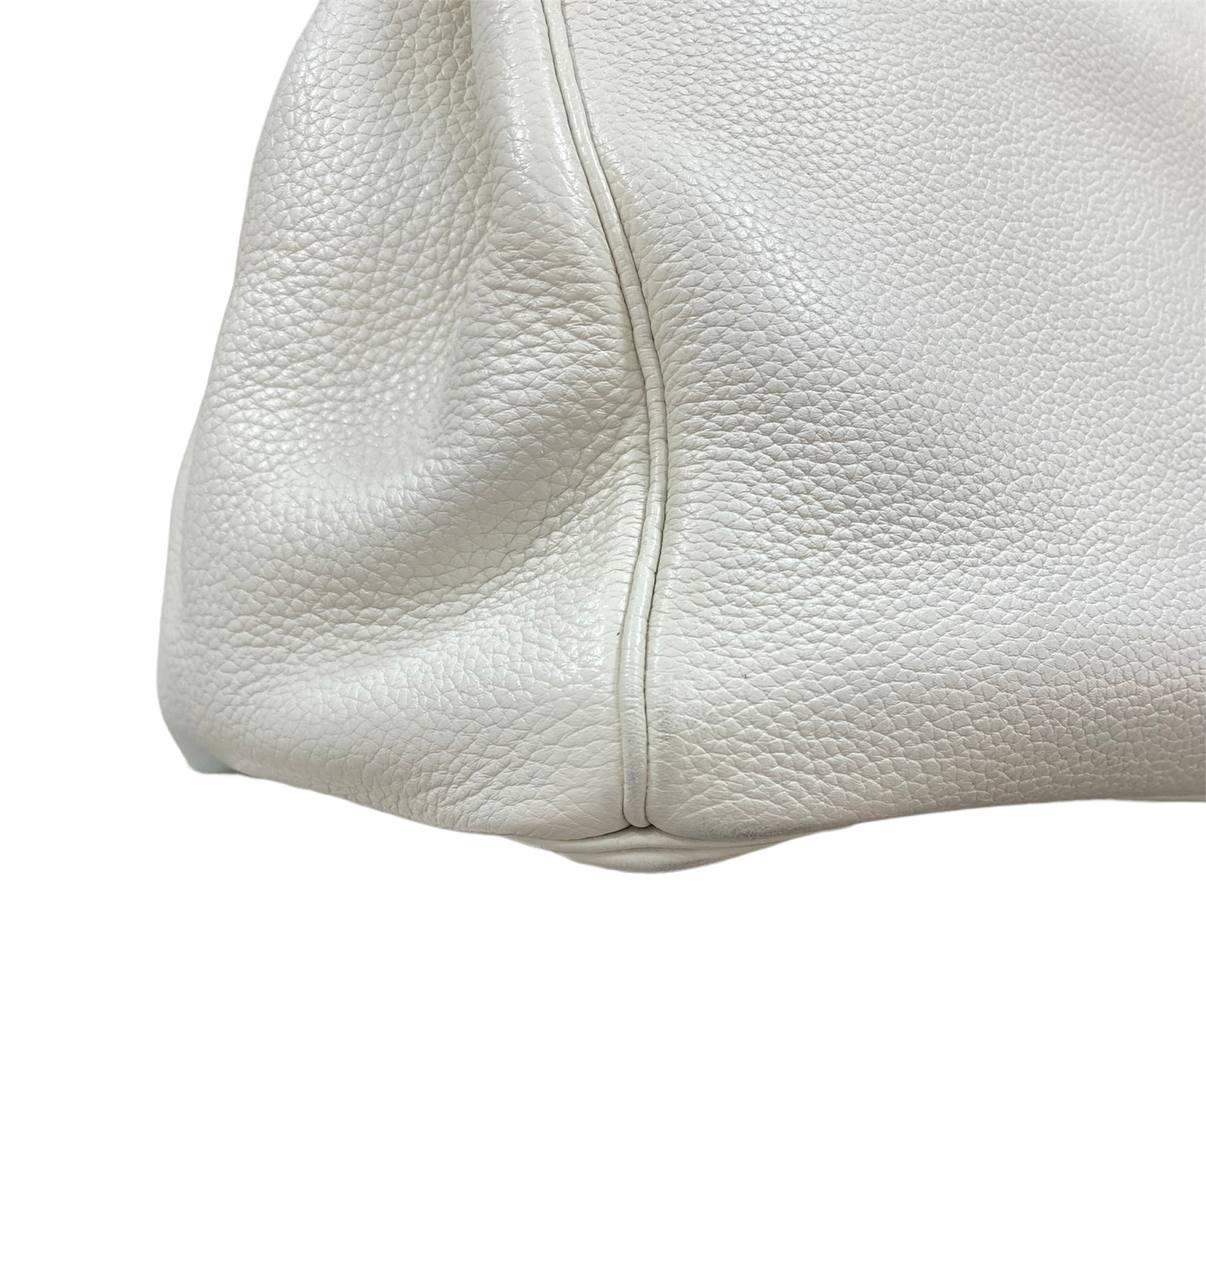 2011 Hermès Birkin 40 White Clemence Leather Top Handle Bag  For Sale 5